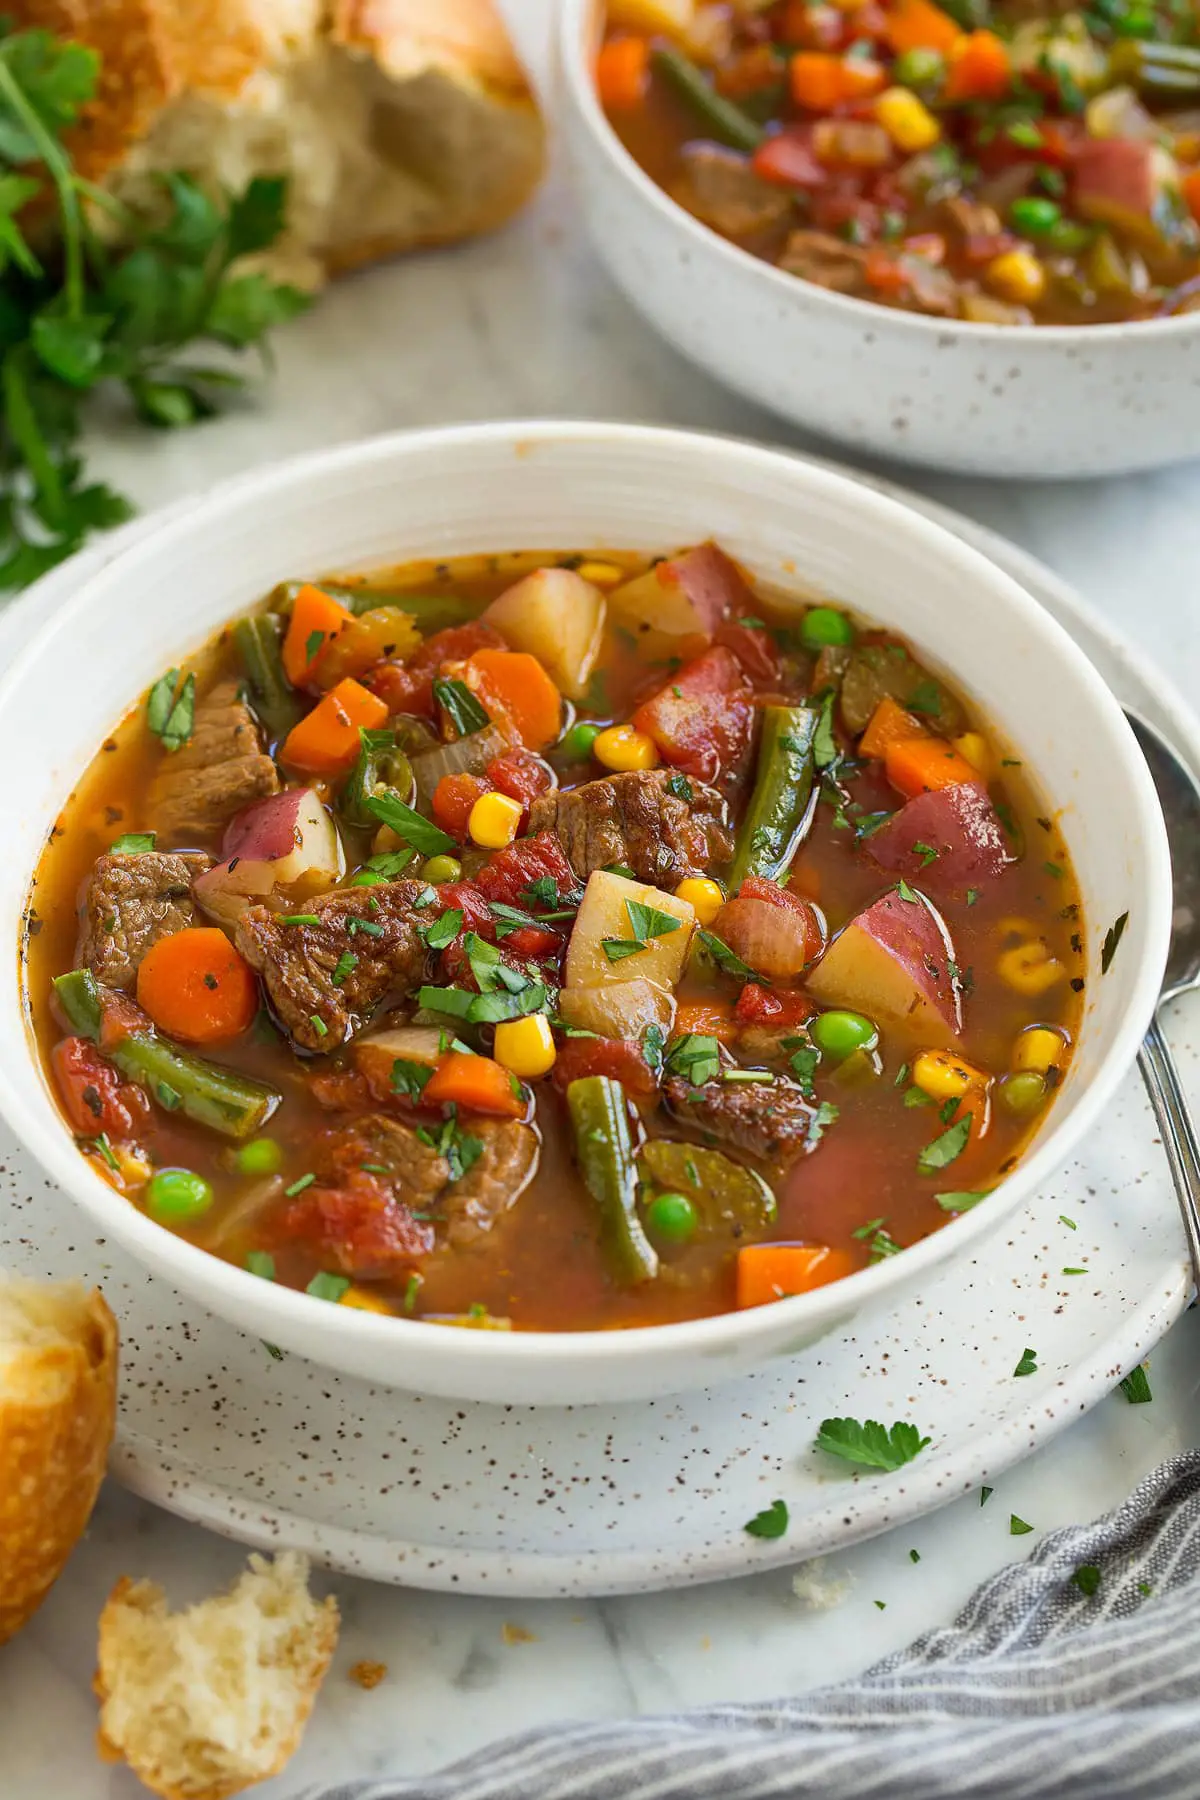 Beef soup is supported by vegetables like squash, okra and tomatoes